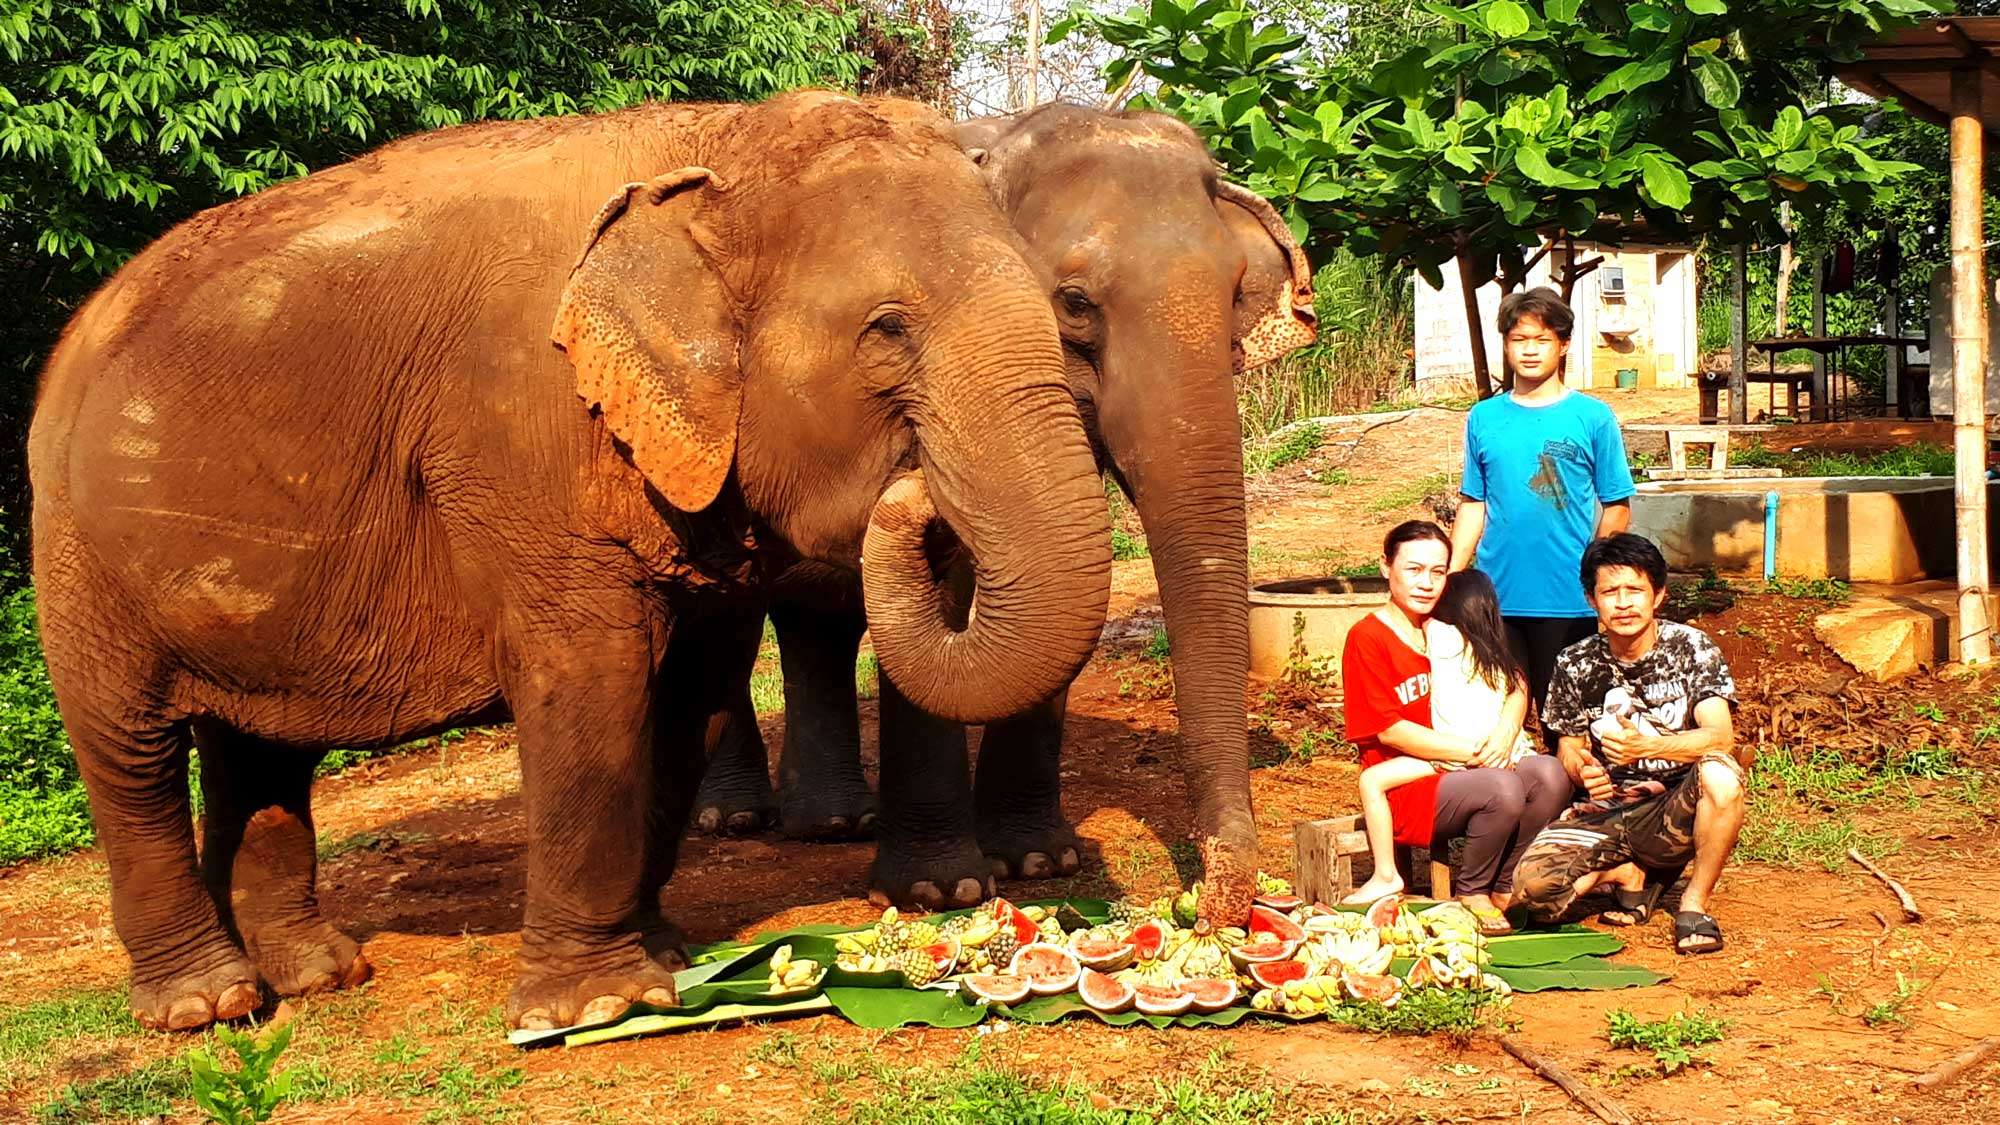 2 Elephants, 4 people (Eddy and his family)